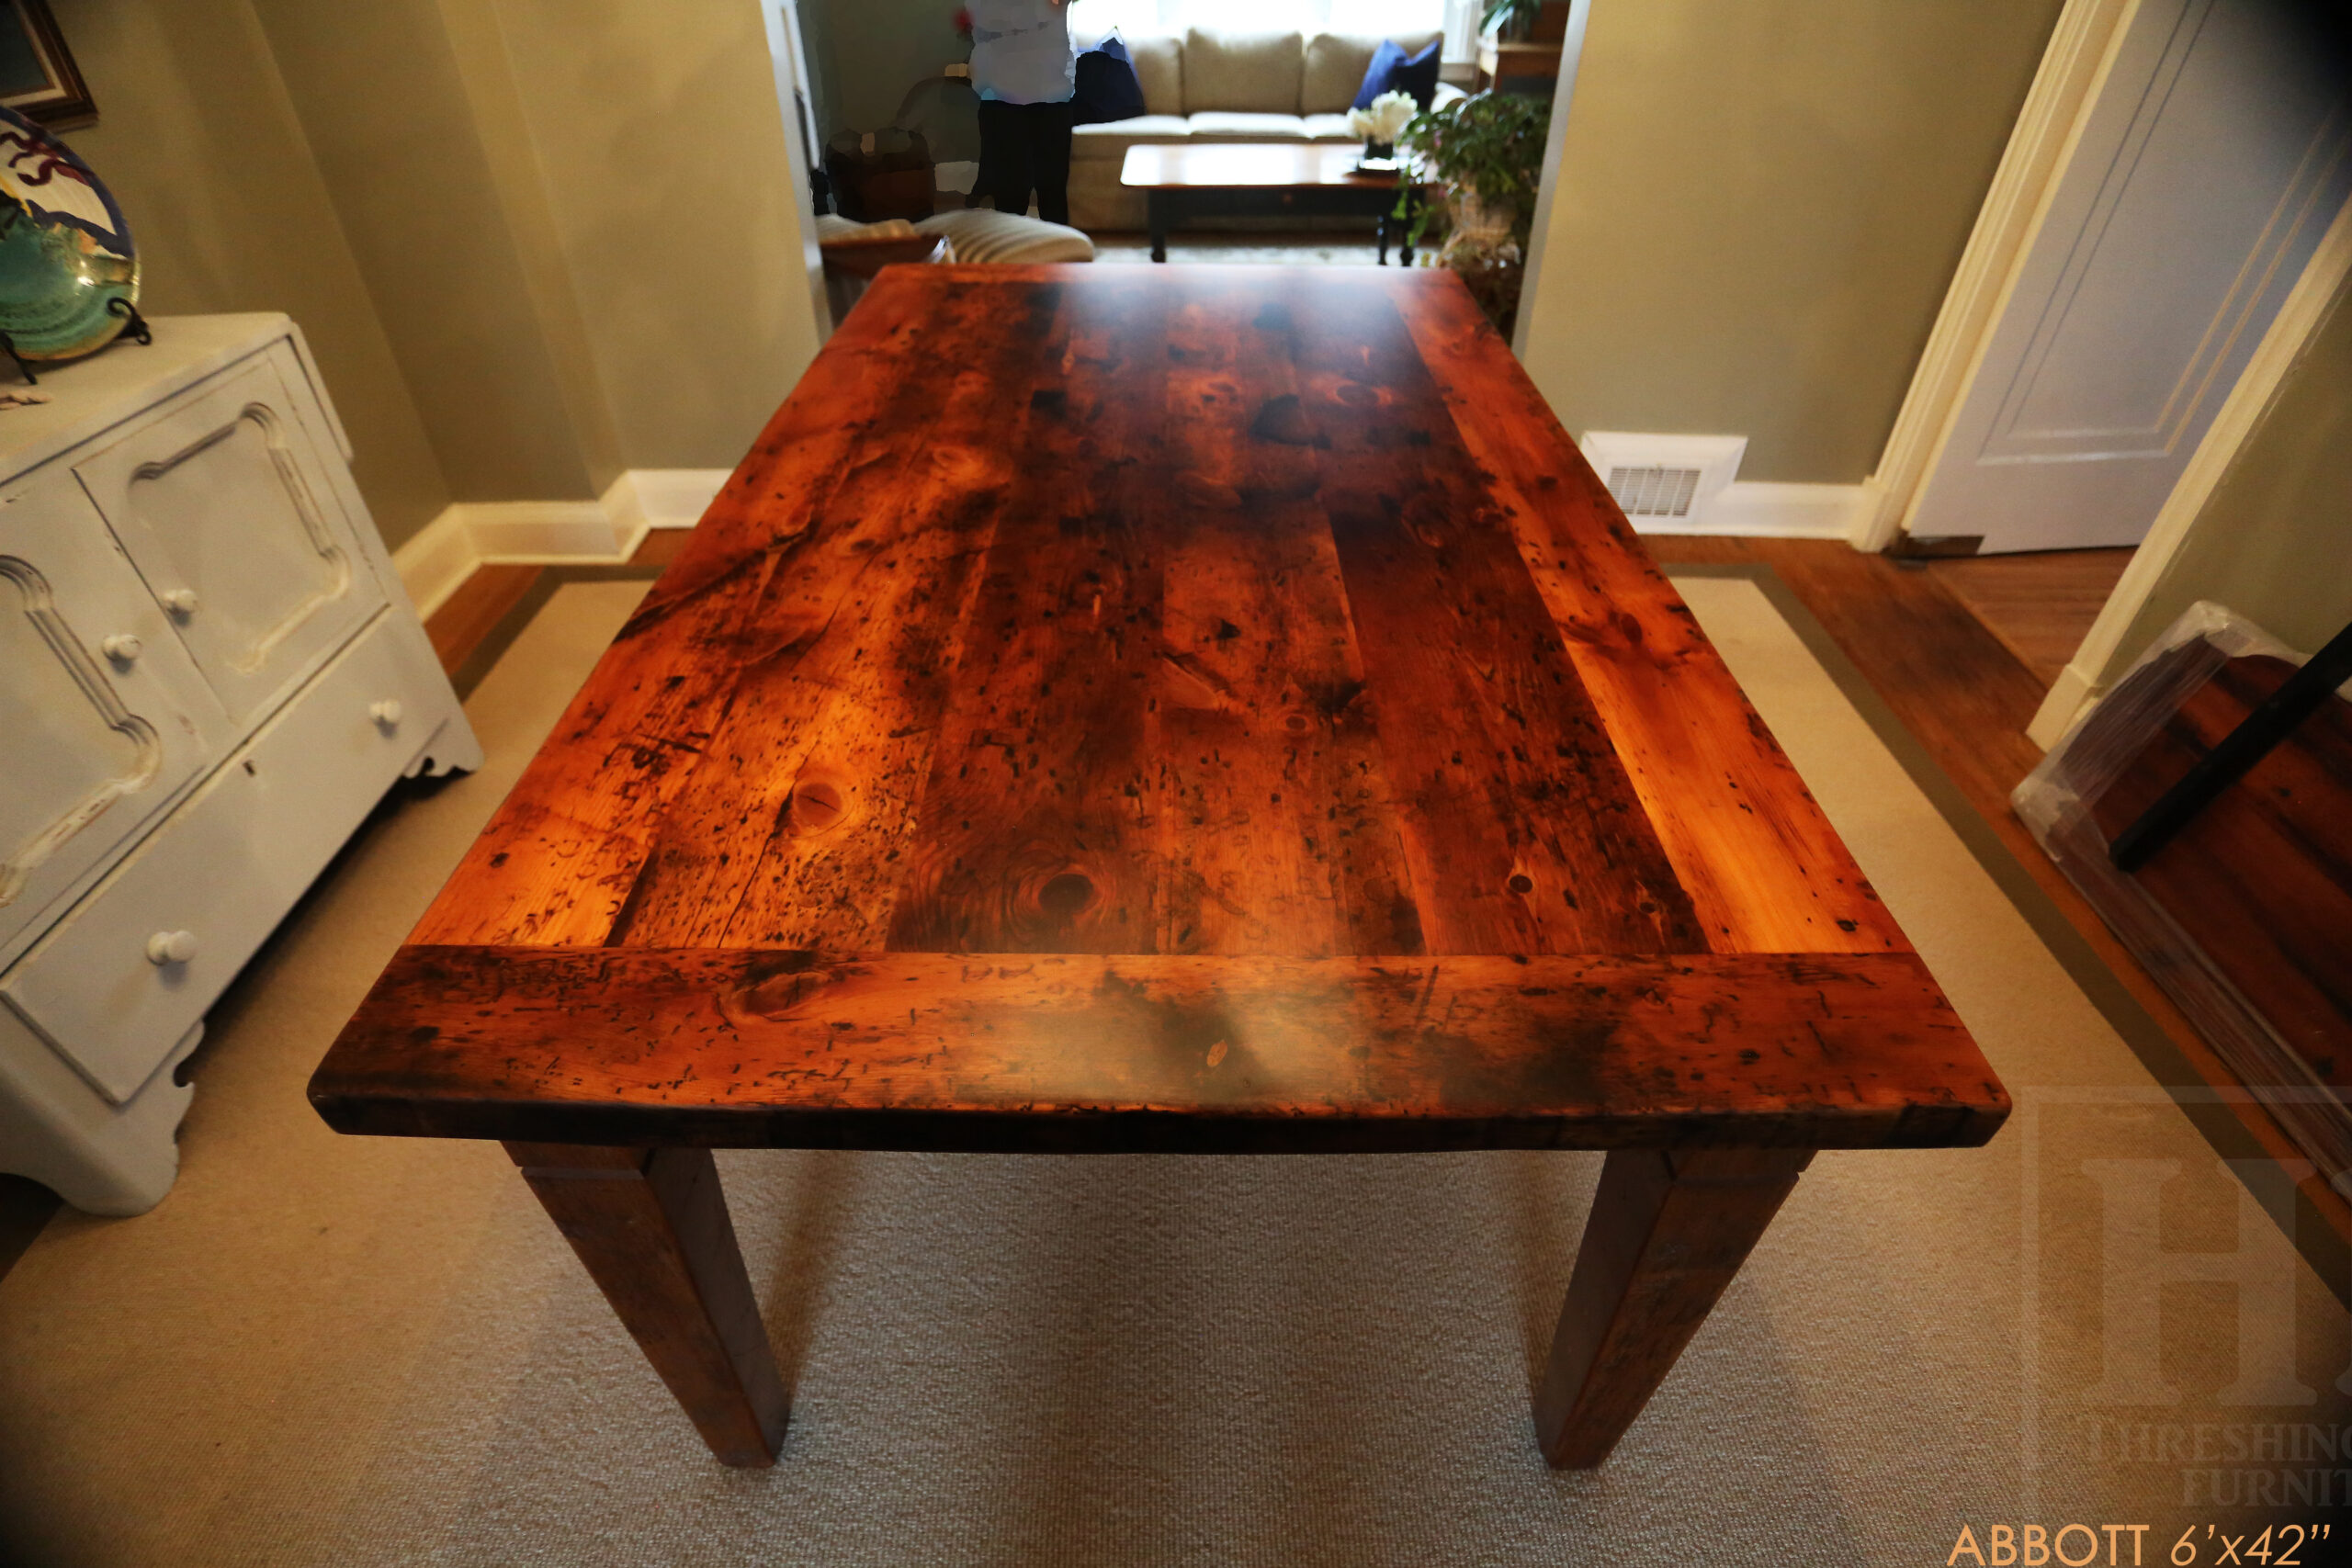 6’ Reclaimed Ontario Barnwood Table – 42” wide – Harvest Base / Tapered with a Notch Windbrace Beam Legs - Old Growth Pine Threshing Floor Construction - Original edges & distressing maintained – Bread Edge Ends – Premium epoxy + satin polyurethane finish – [1] 18” leaf - www.table.ca